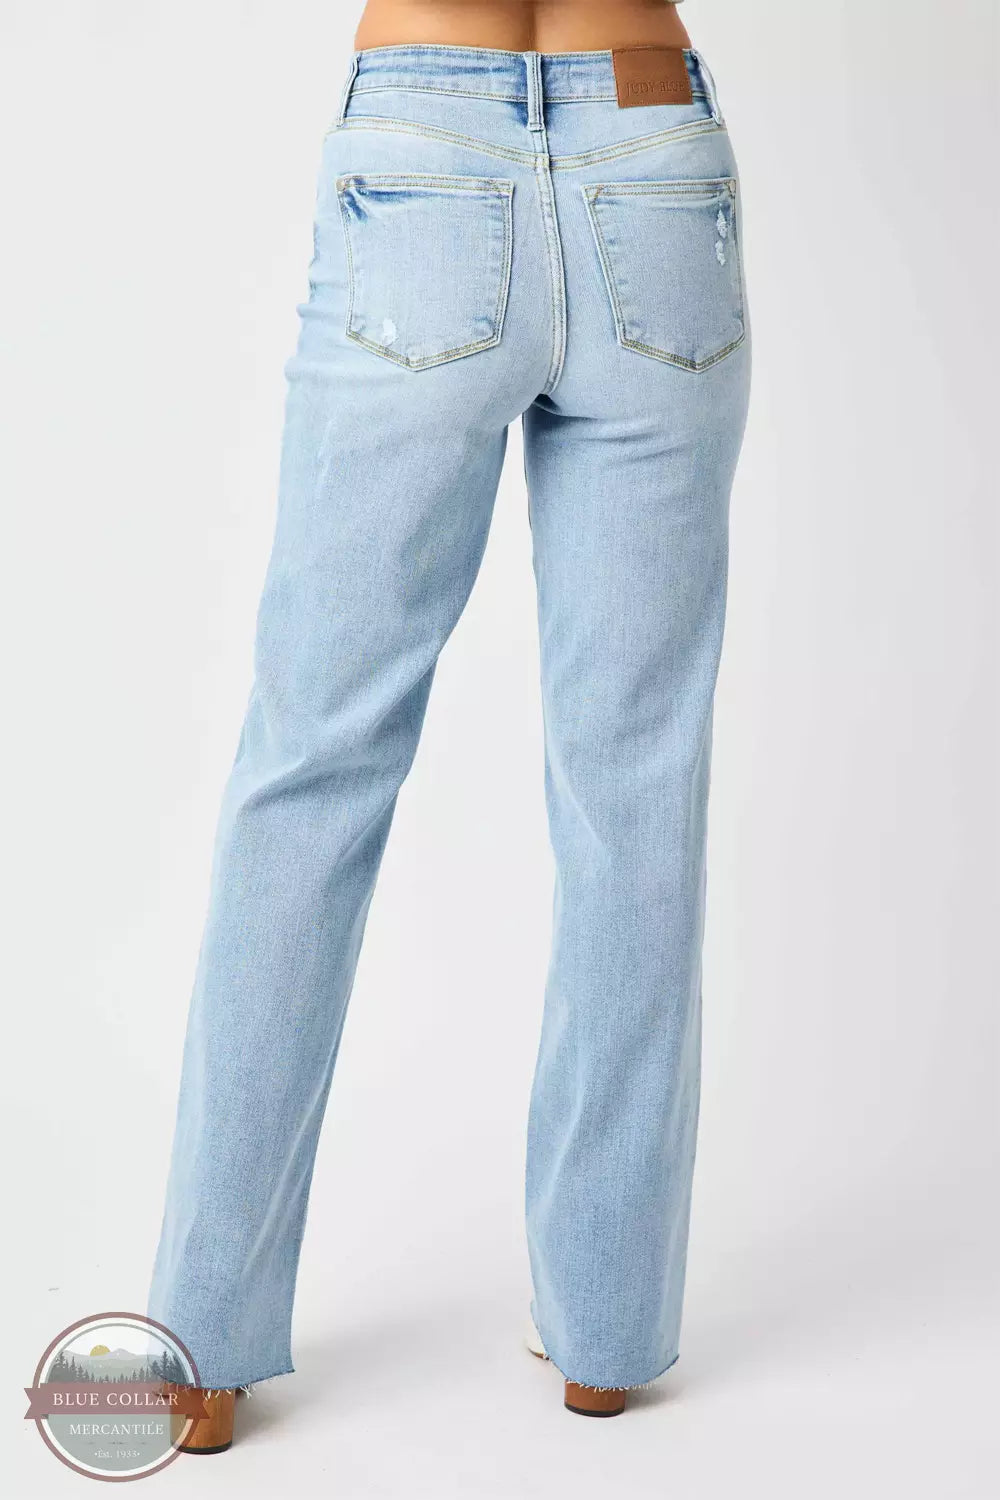 Judy Blue 82483REG High Waist V Front Waistband Straight Fit Jeans in Light Back View